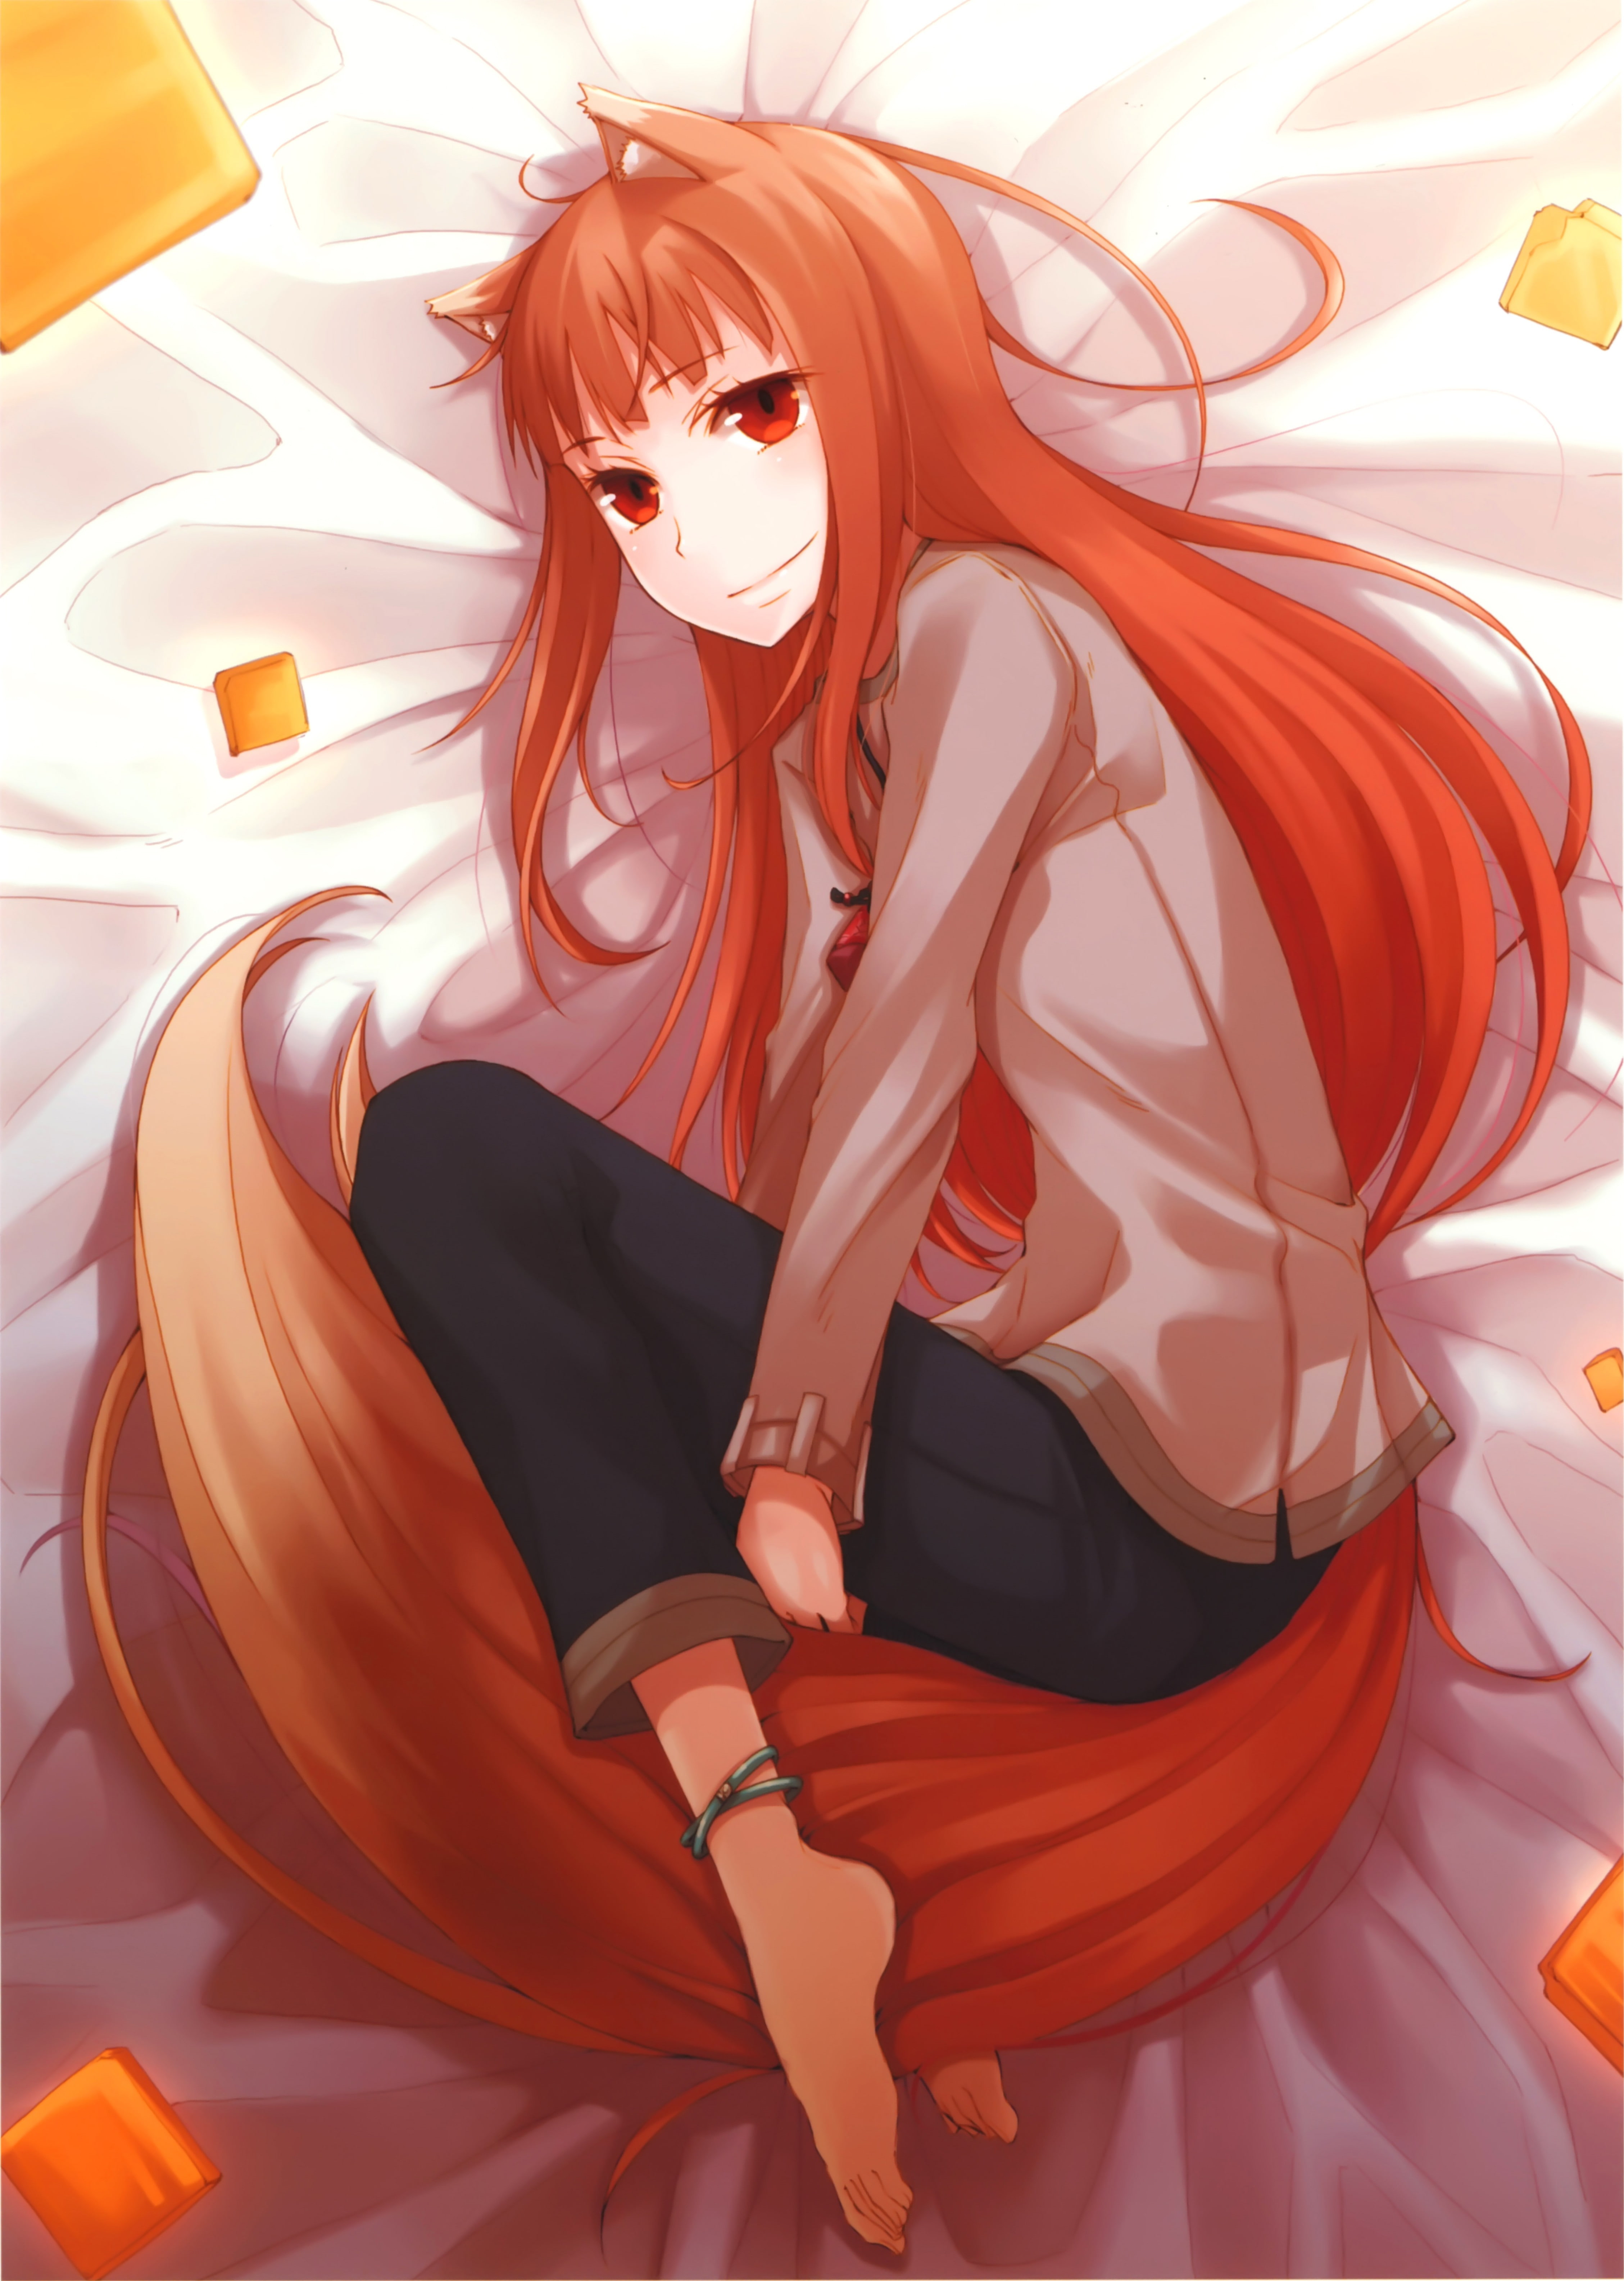 Holo, red eyes, anime girls, long hair, Spice and Wolf